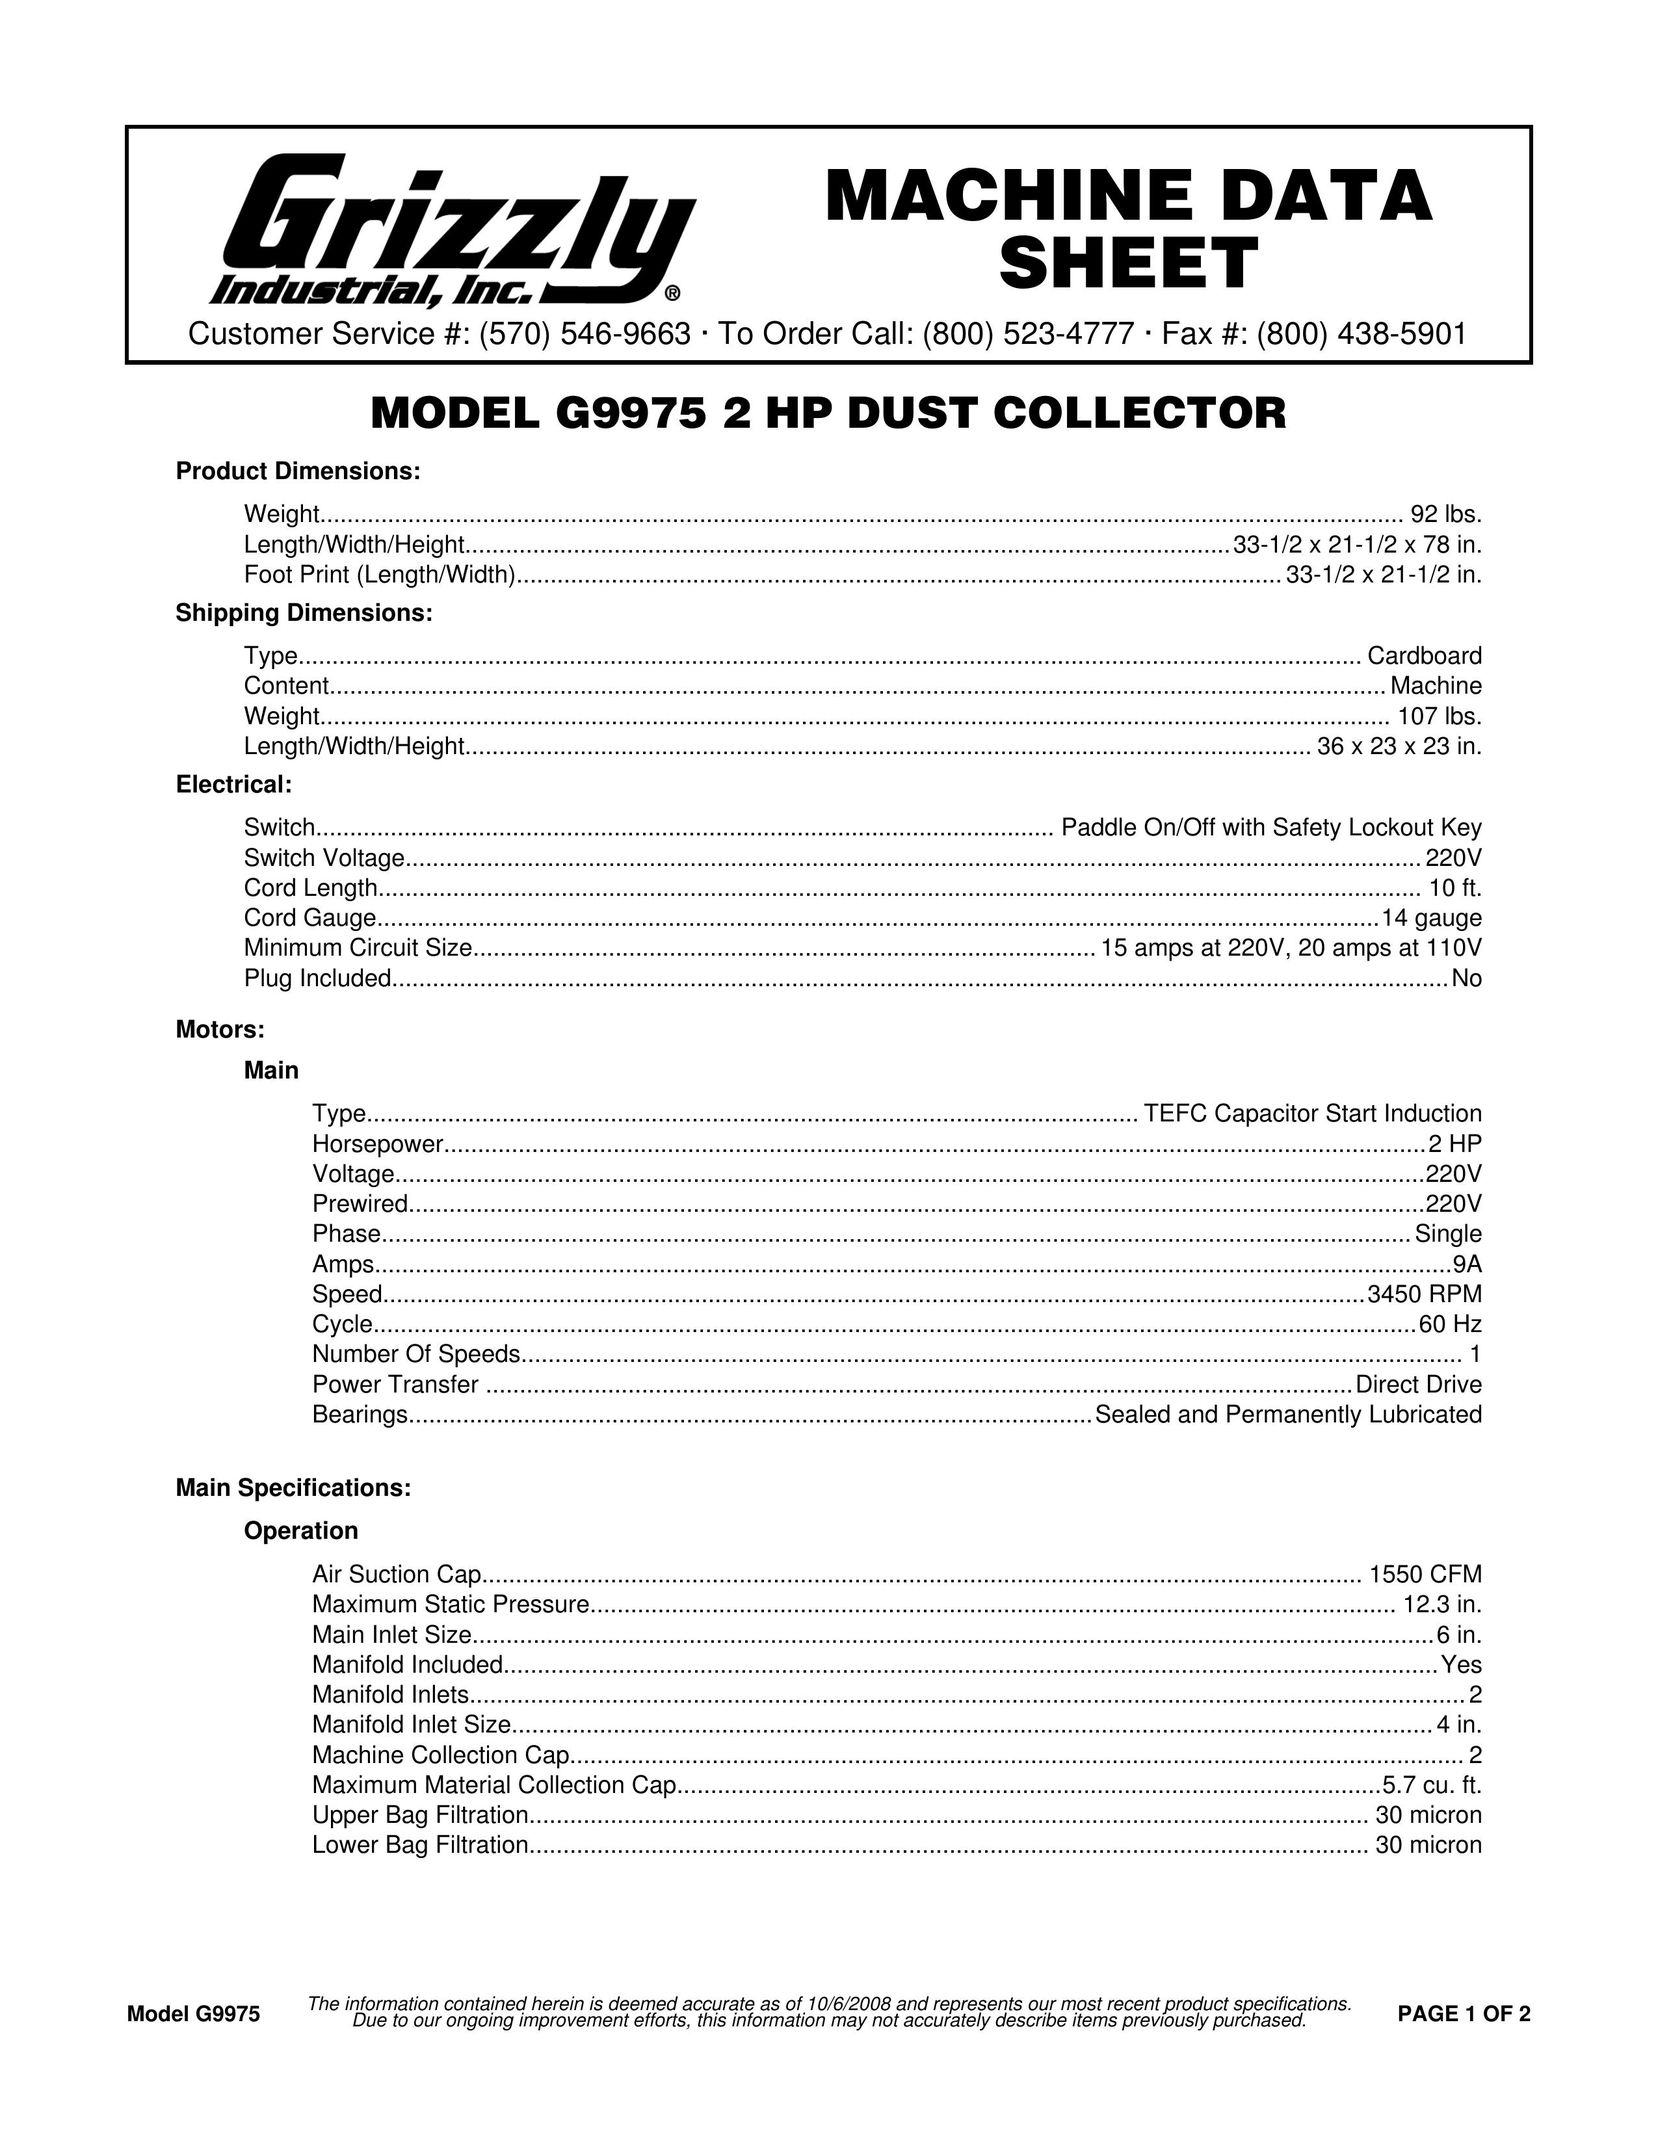 Grizzly G9975 Dust Collector User Manual